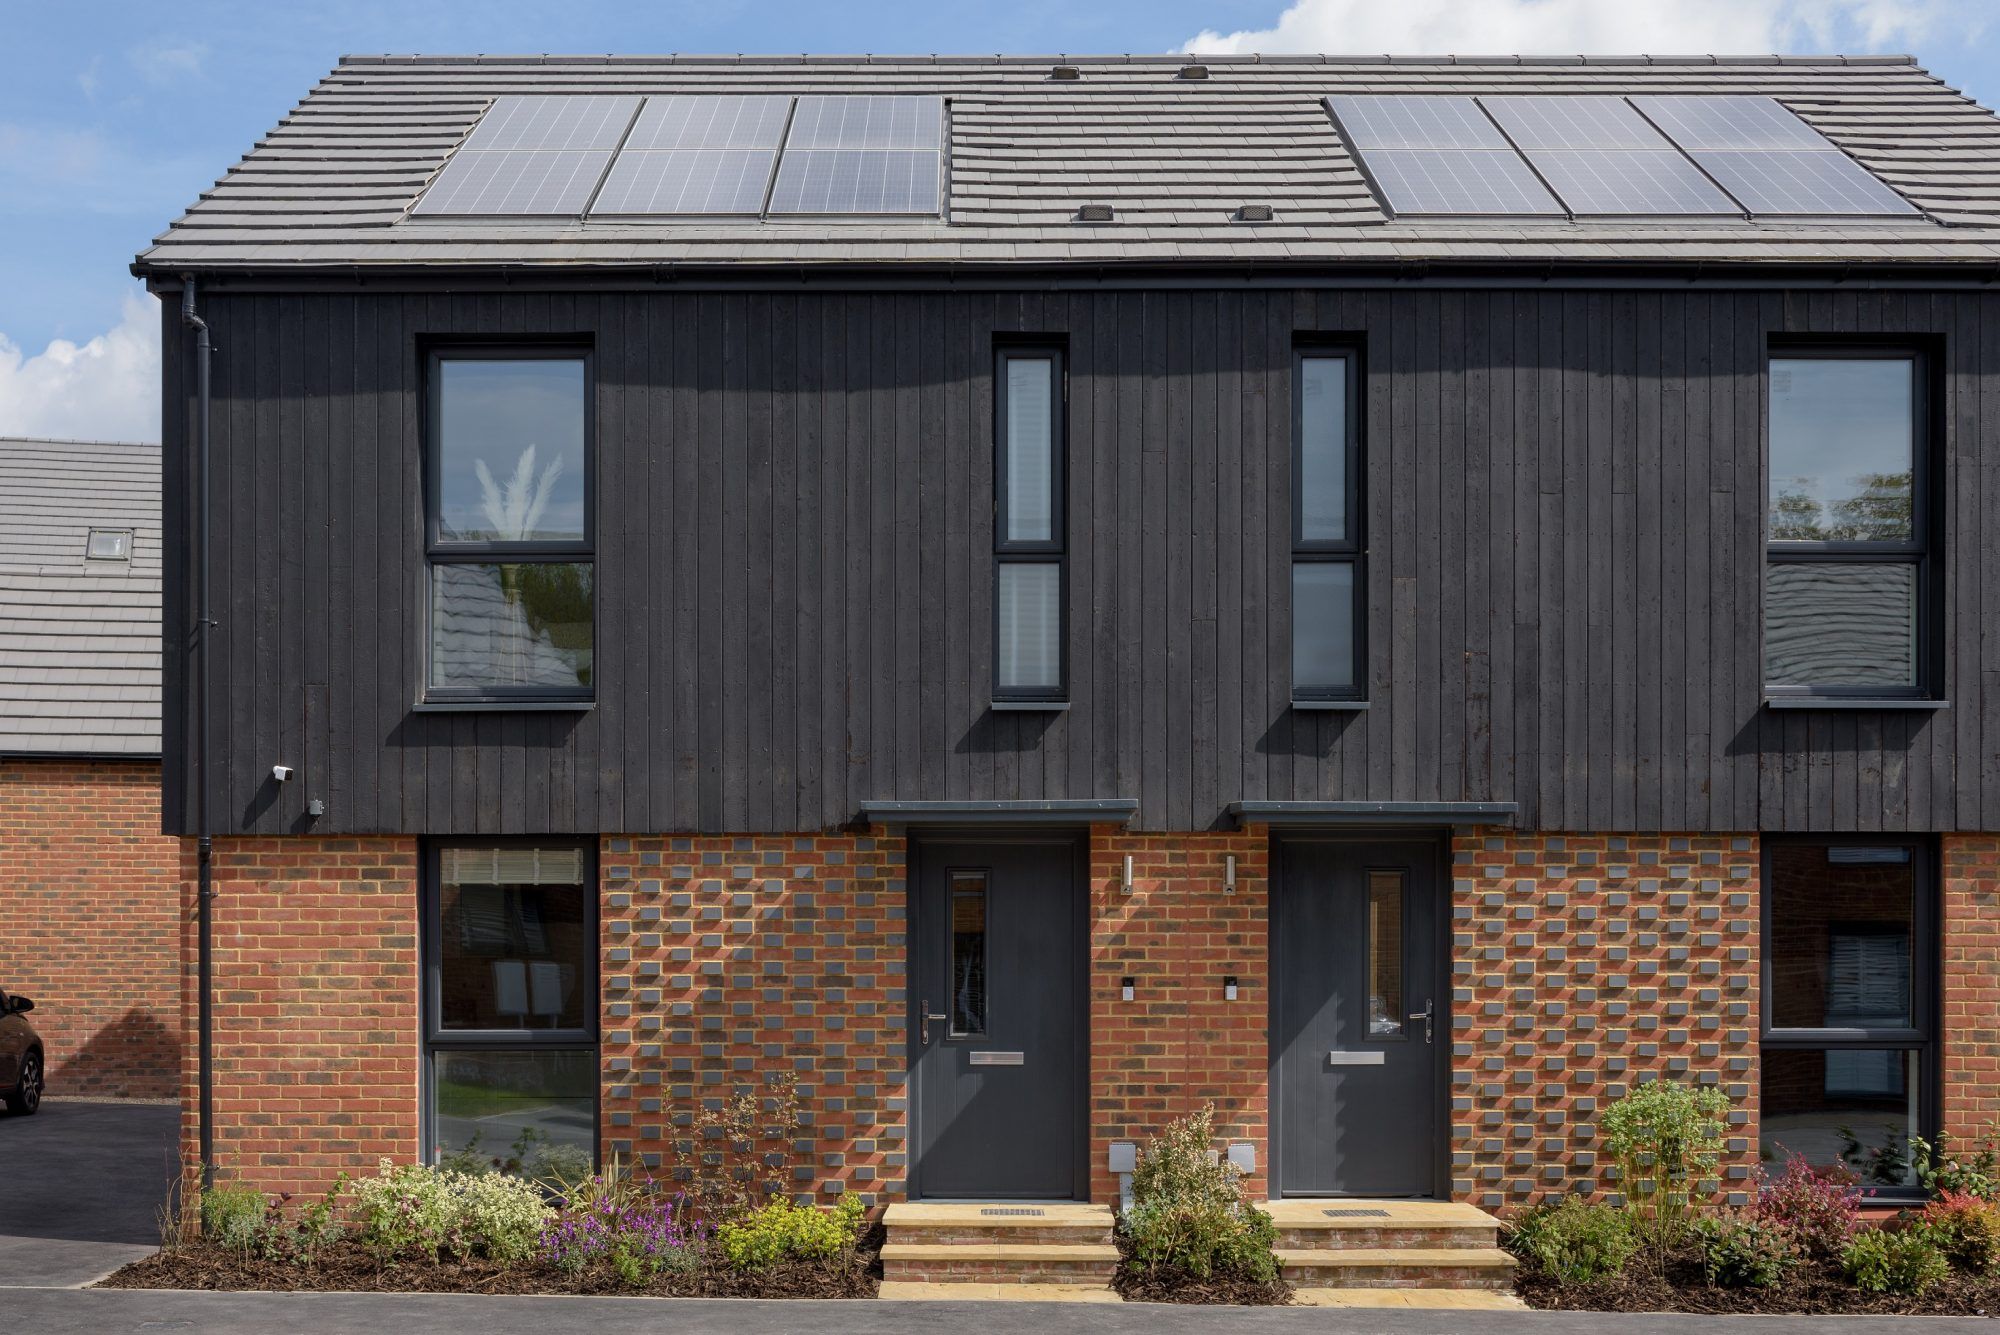 First Affordable Carbon Negative Homes to Be Trialled